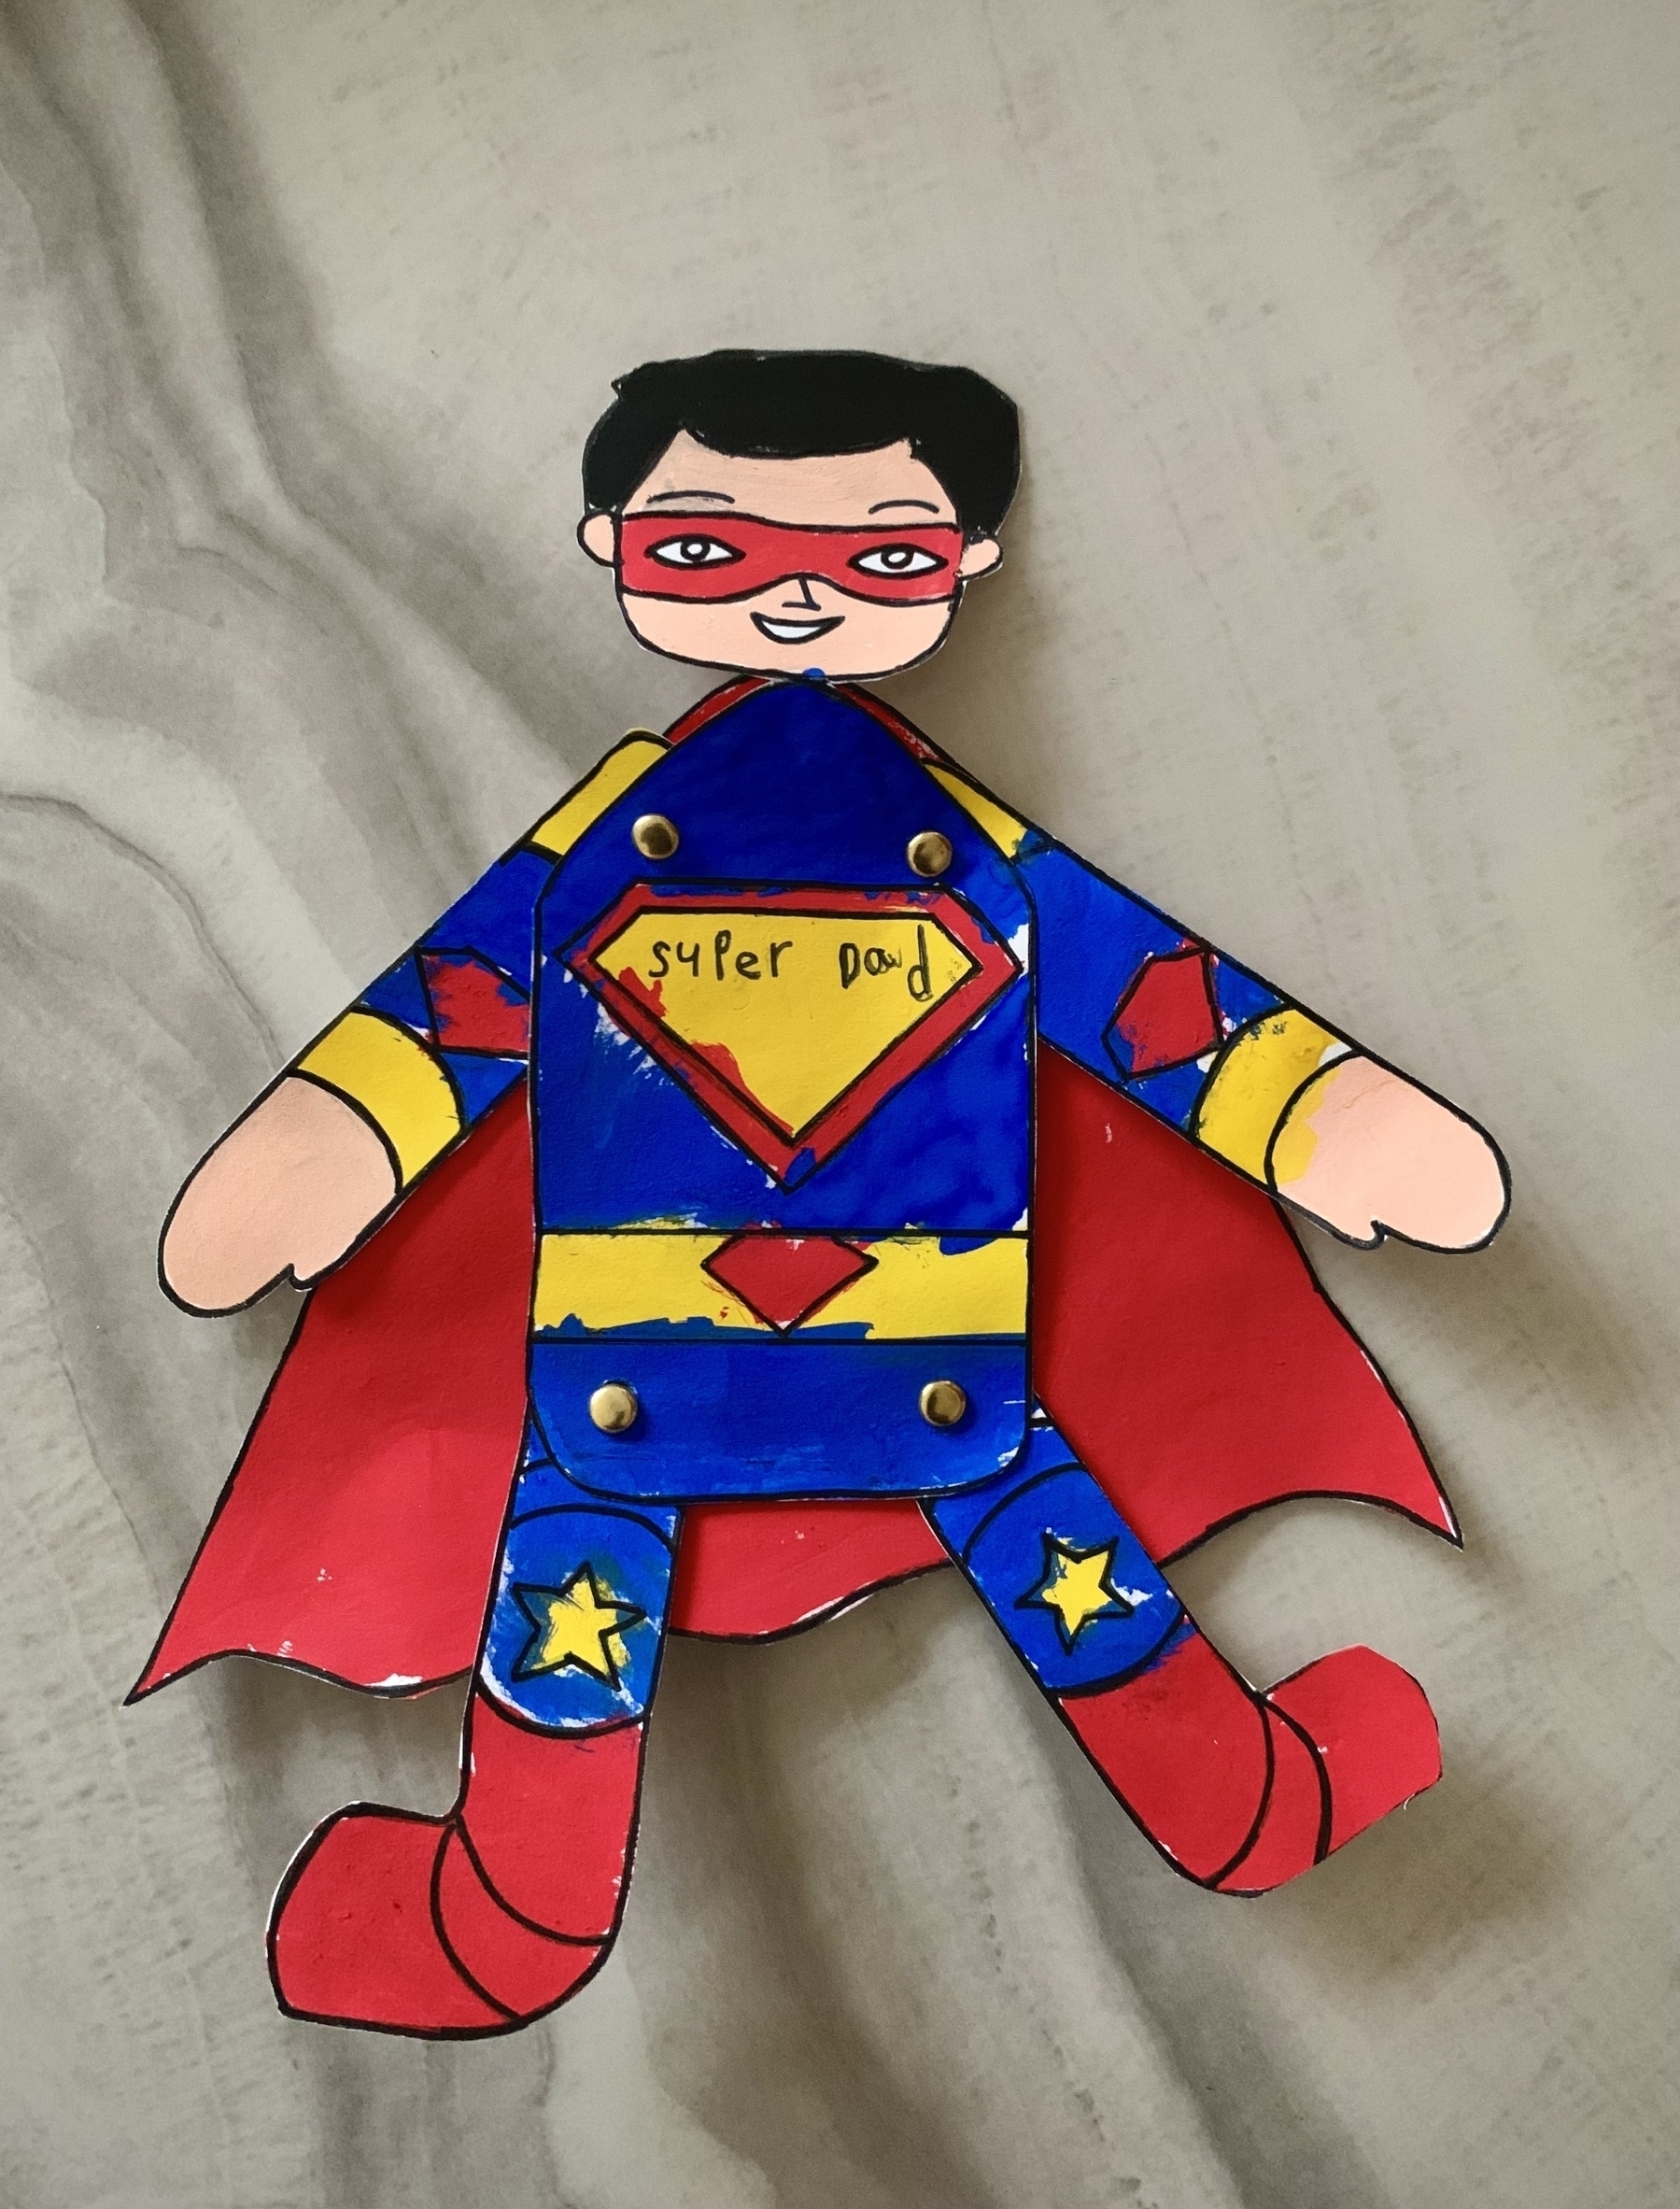 A hand-drawn, colored paper cutout of a superhero with text “Super Dad” on its chest lies on a textured grey background.